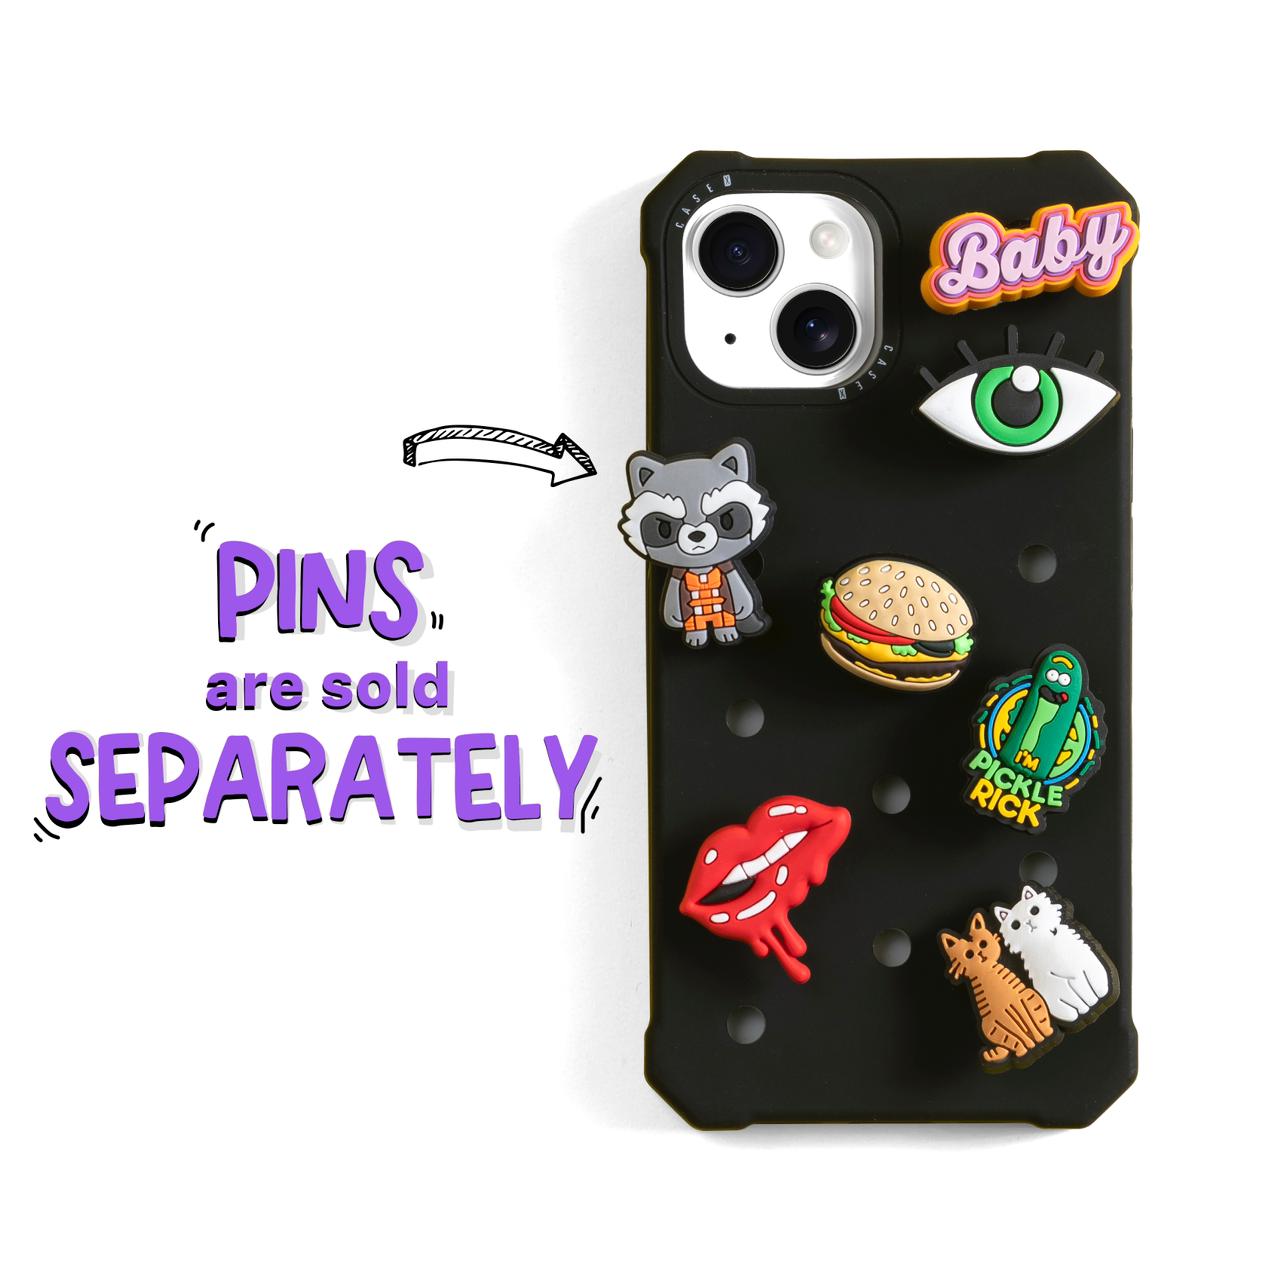 The Pin Case